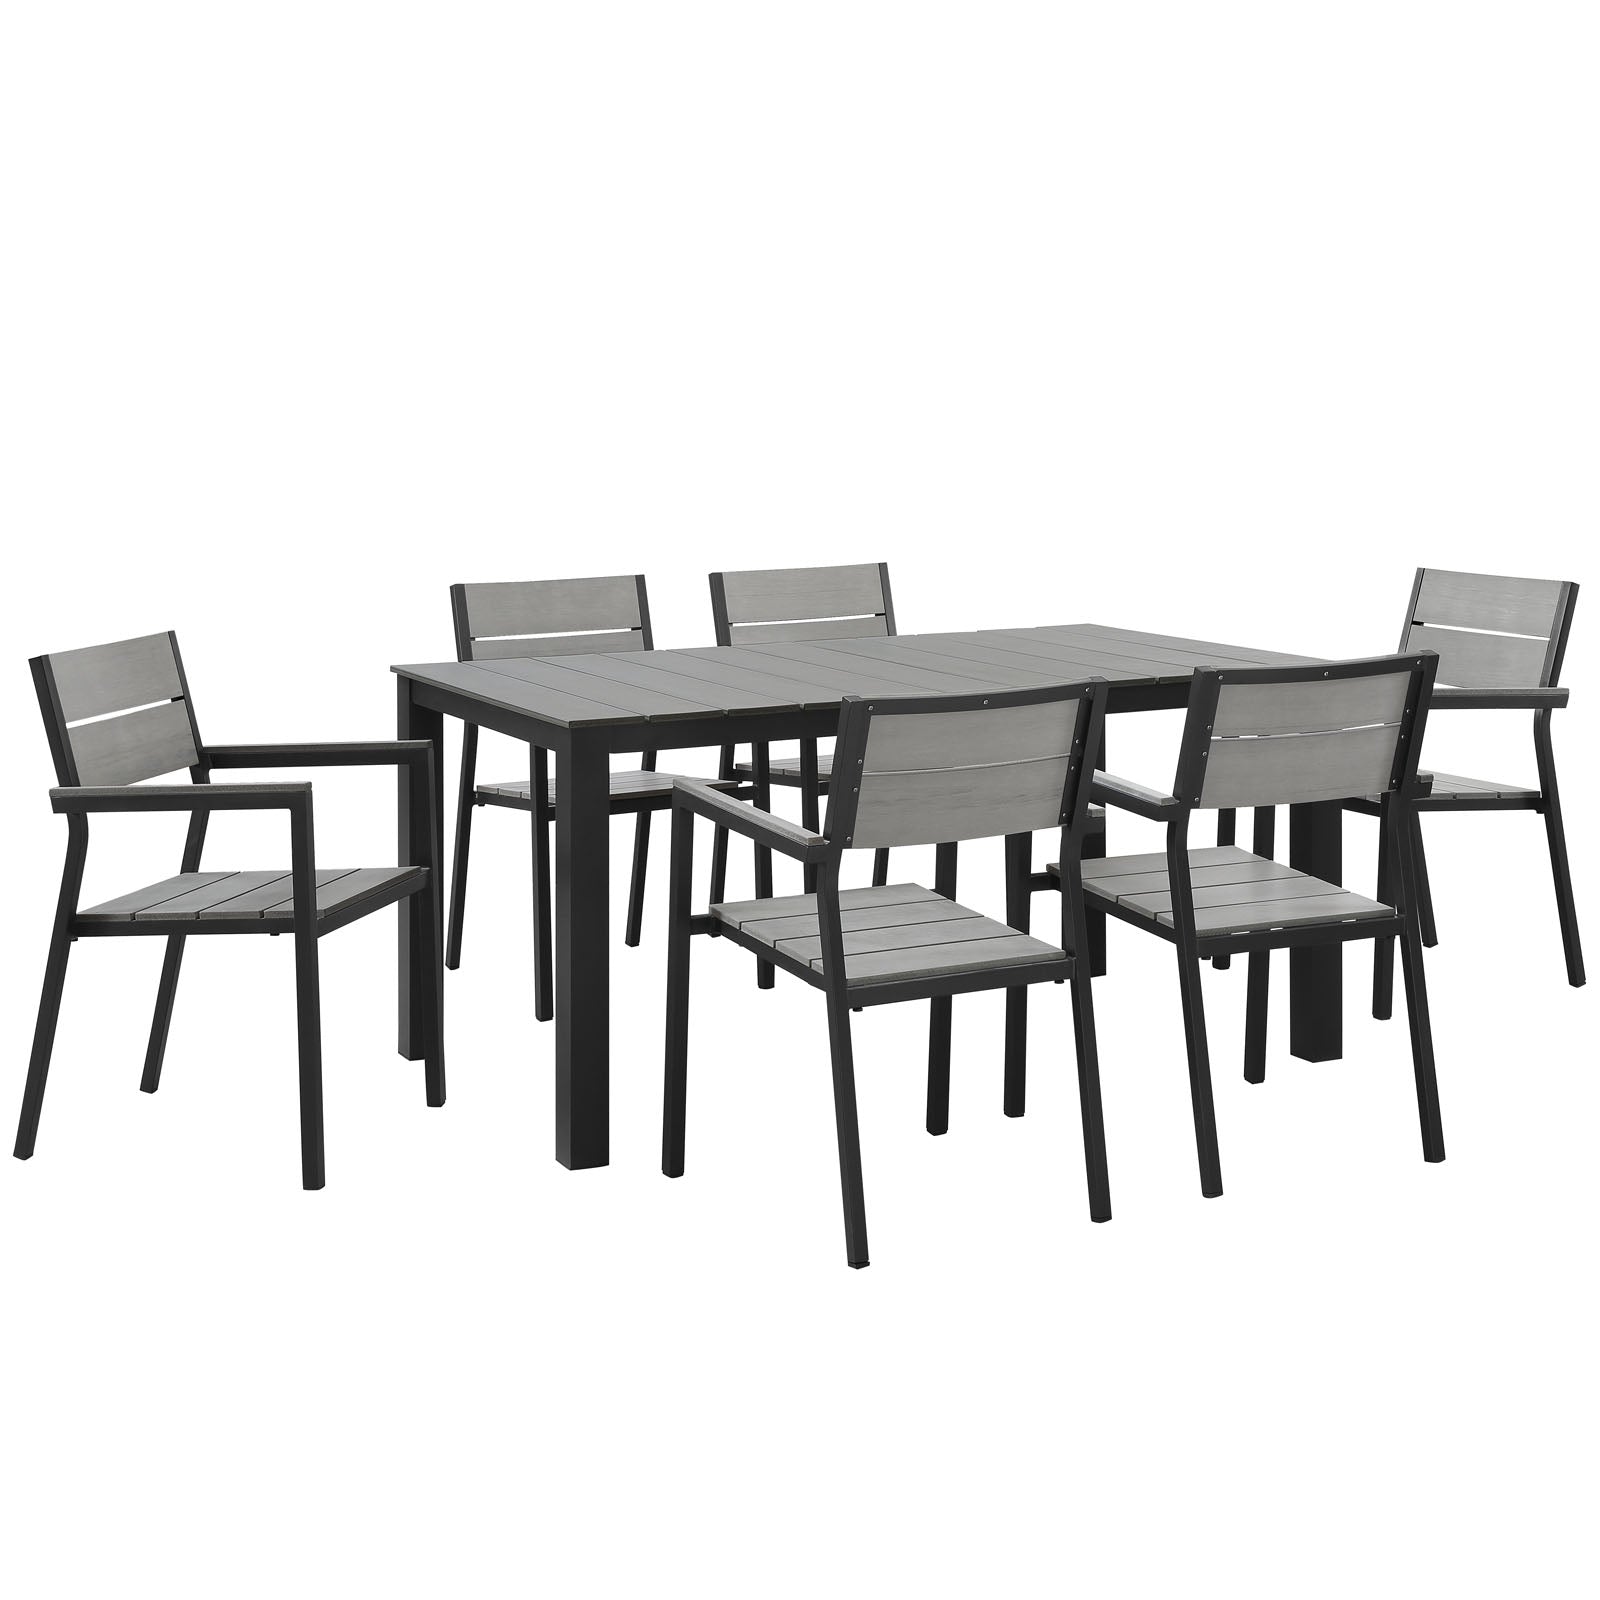 Maine 7 Piece Outdoor Patio Dining Set - East Shore Modern Home Furnishings